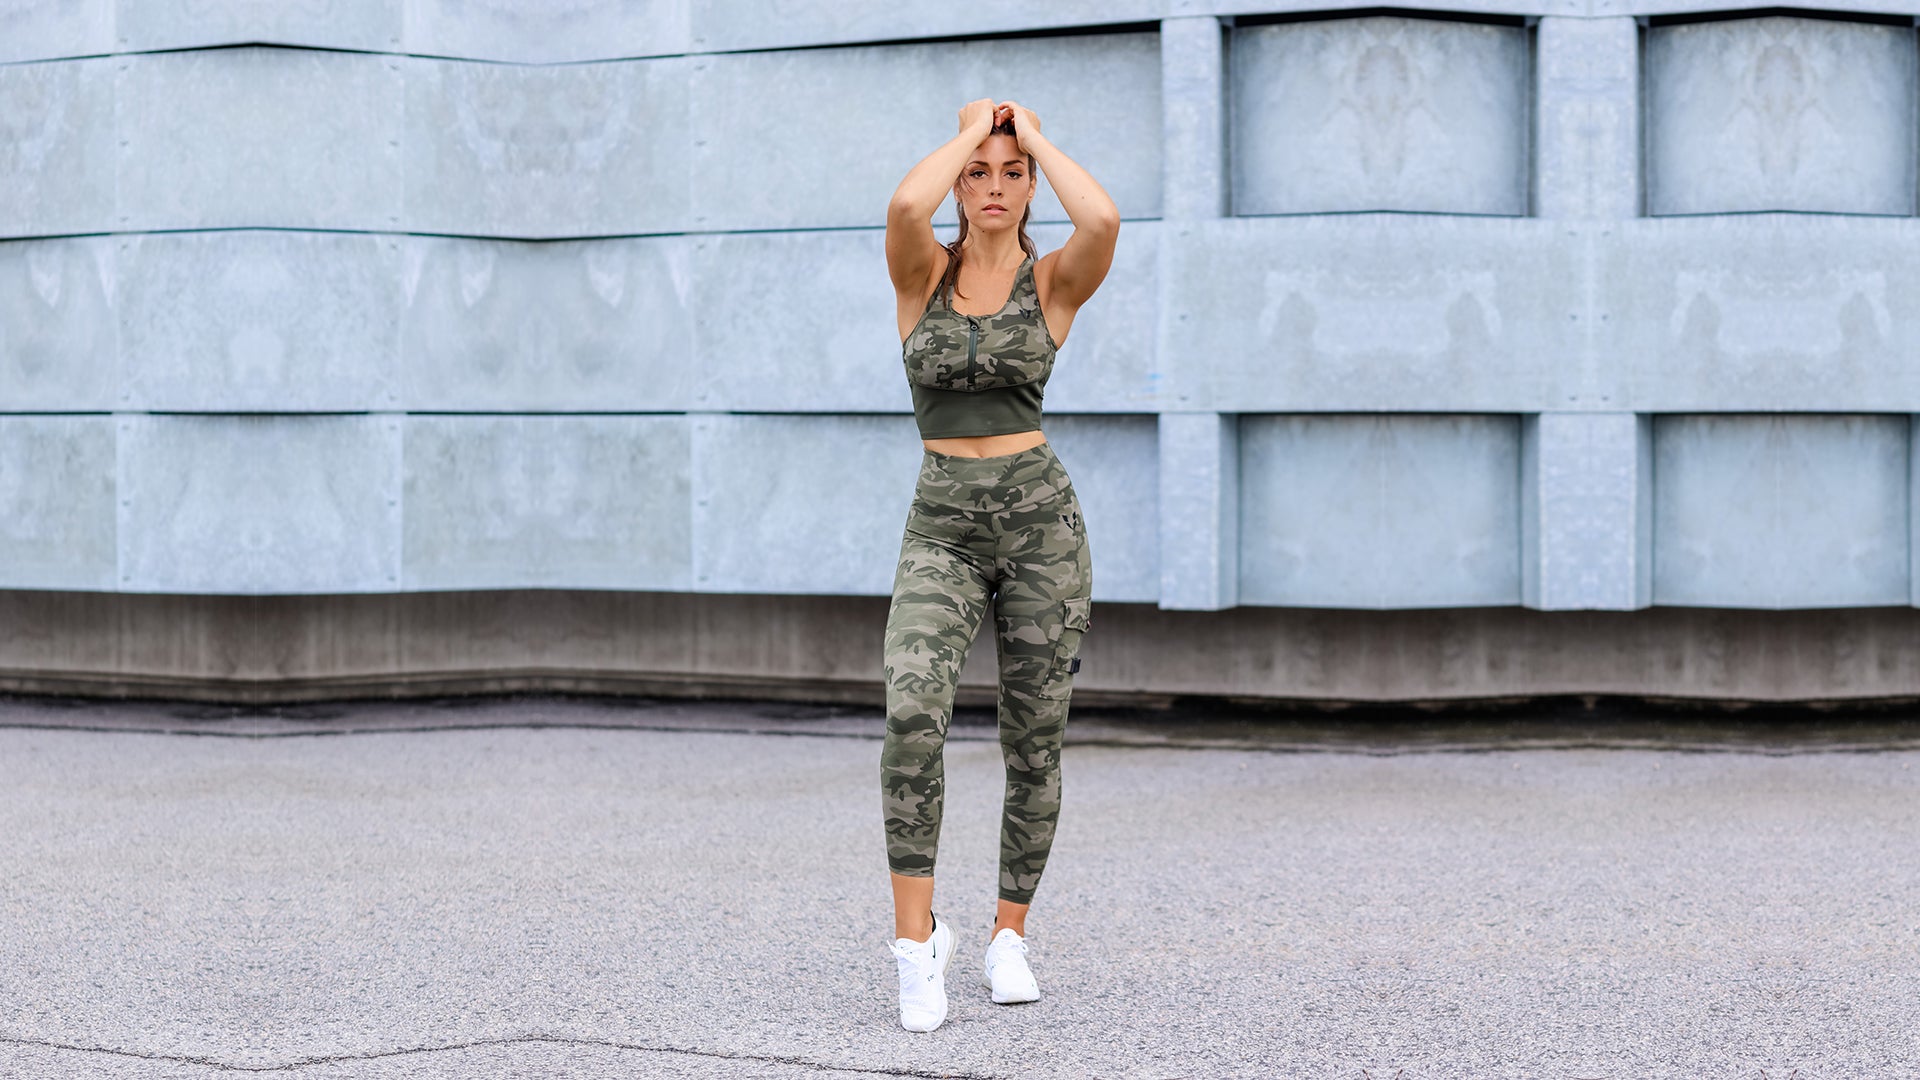 lululemon athletica Camouflage Athletic Tank Tops for Women